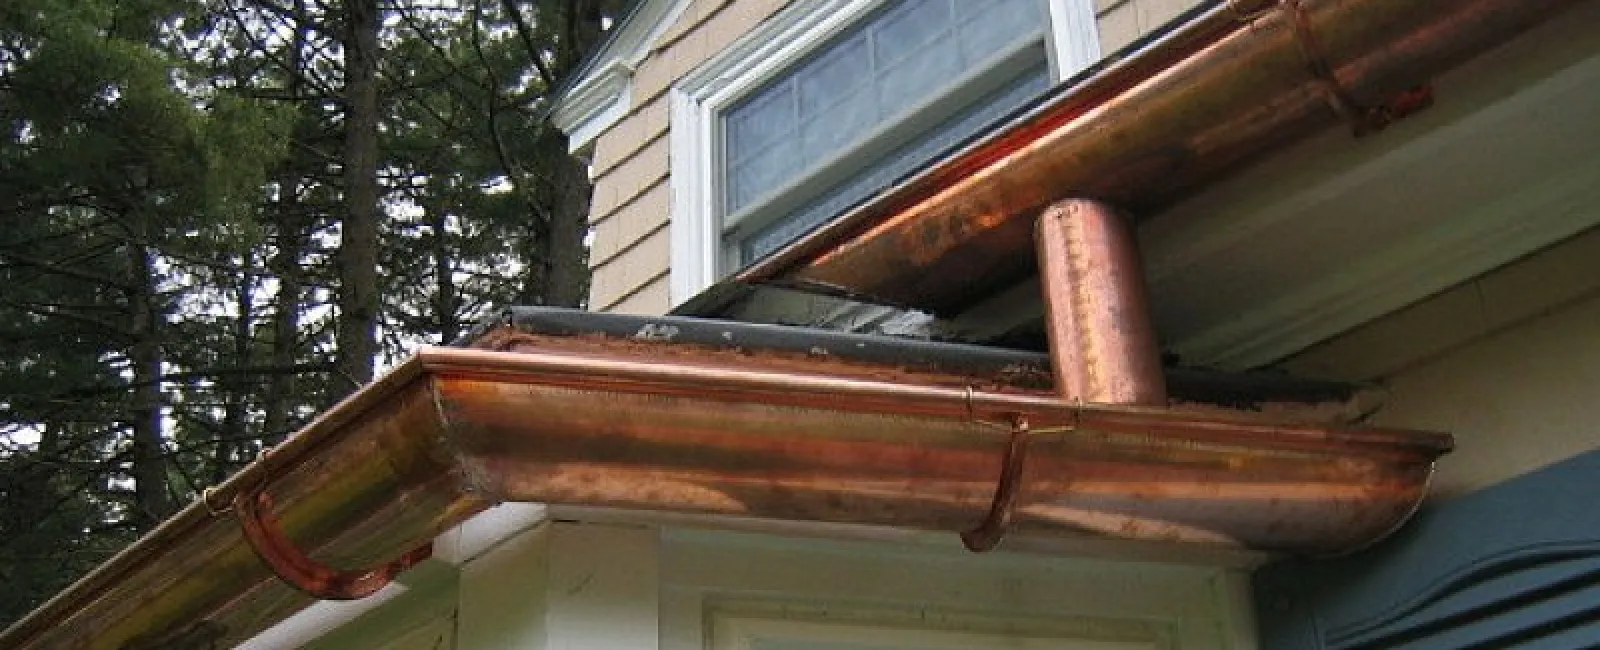 Gutter Replacement: What You Need to Know